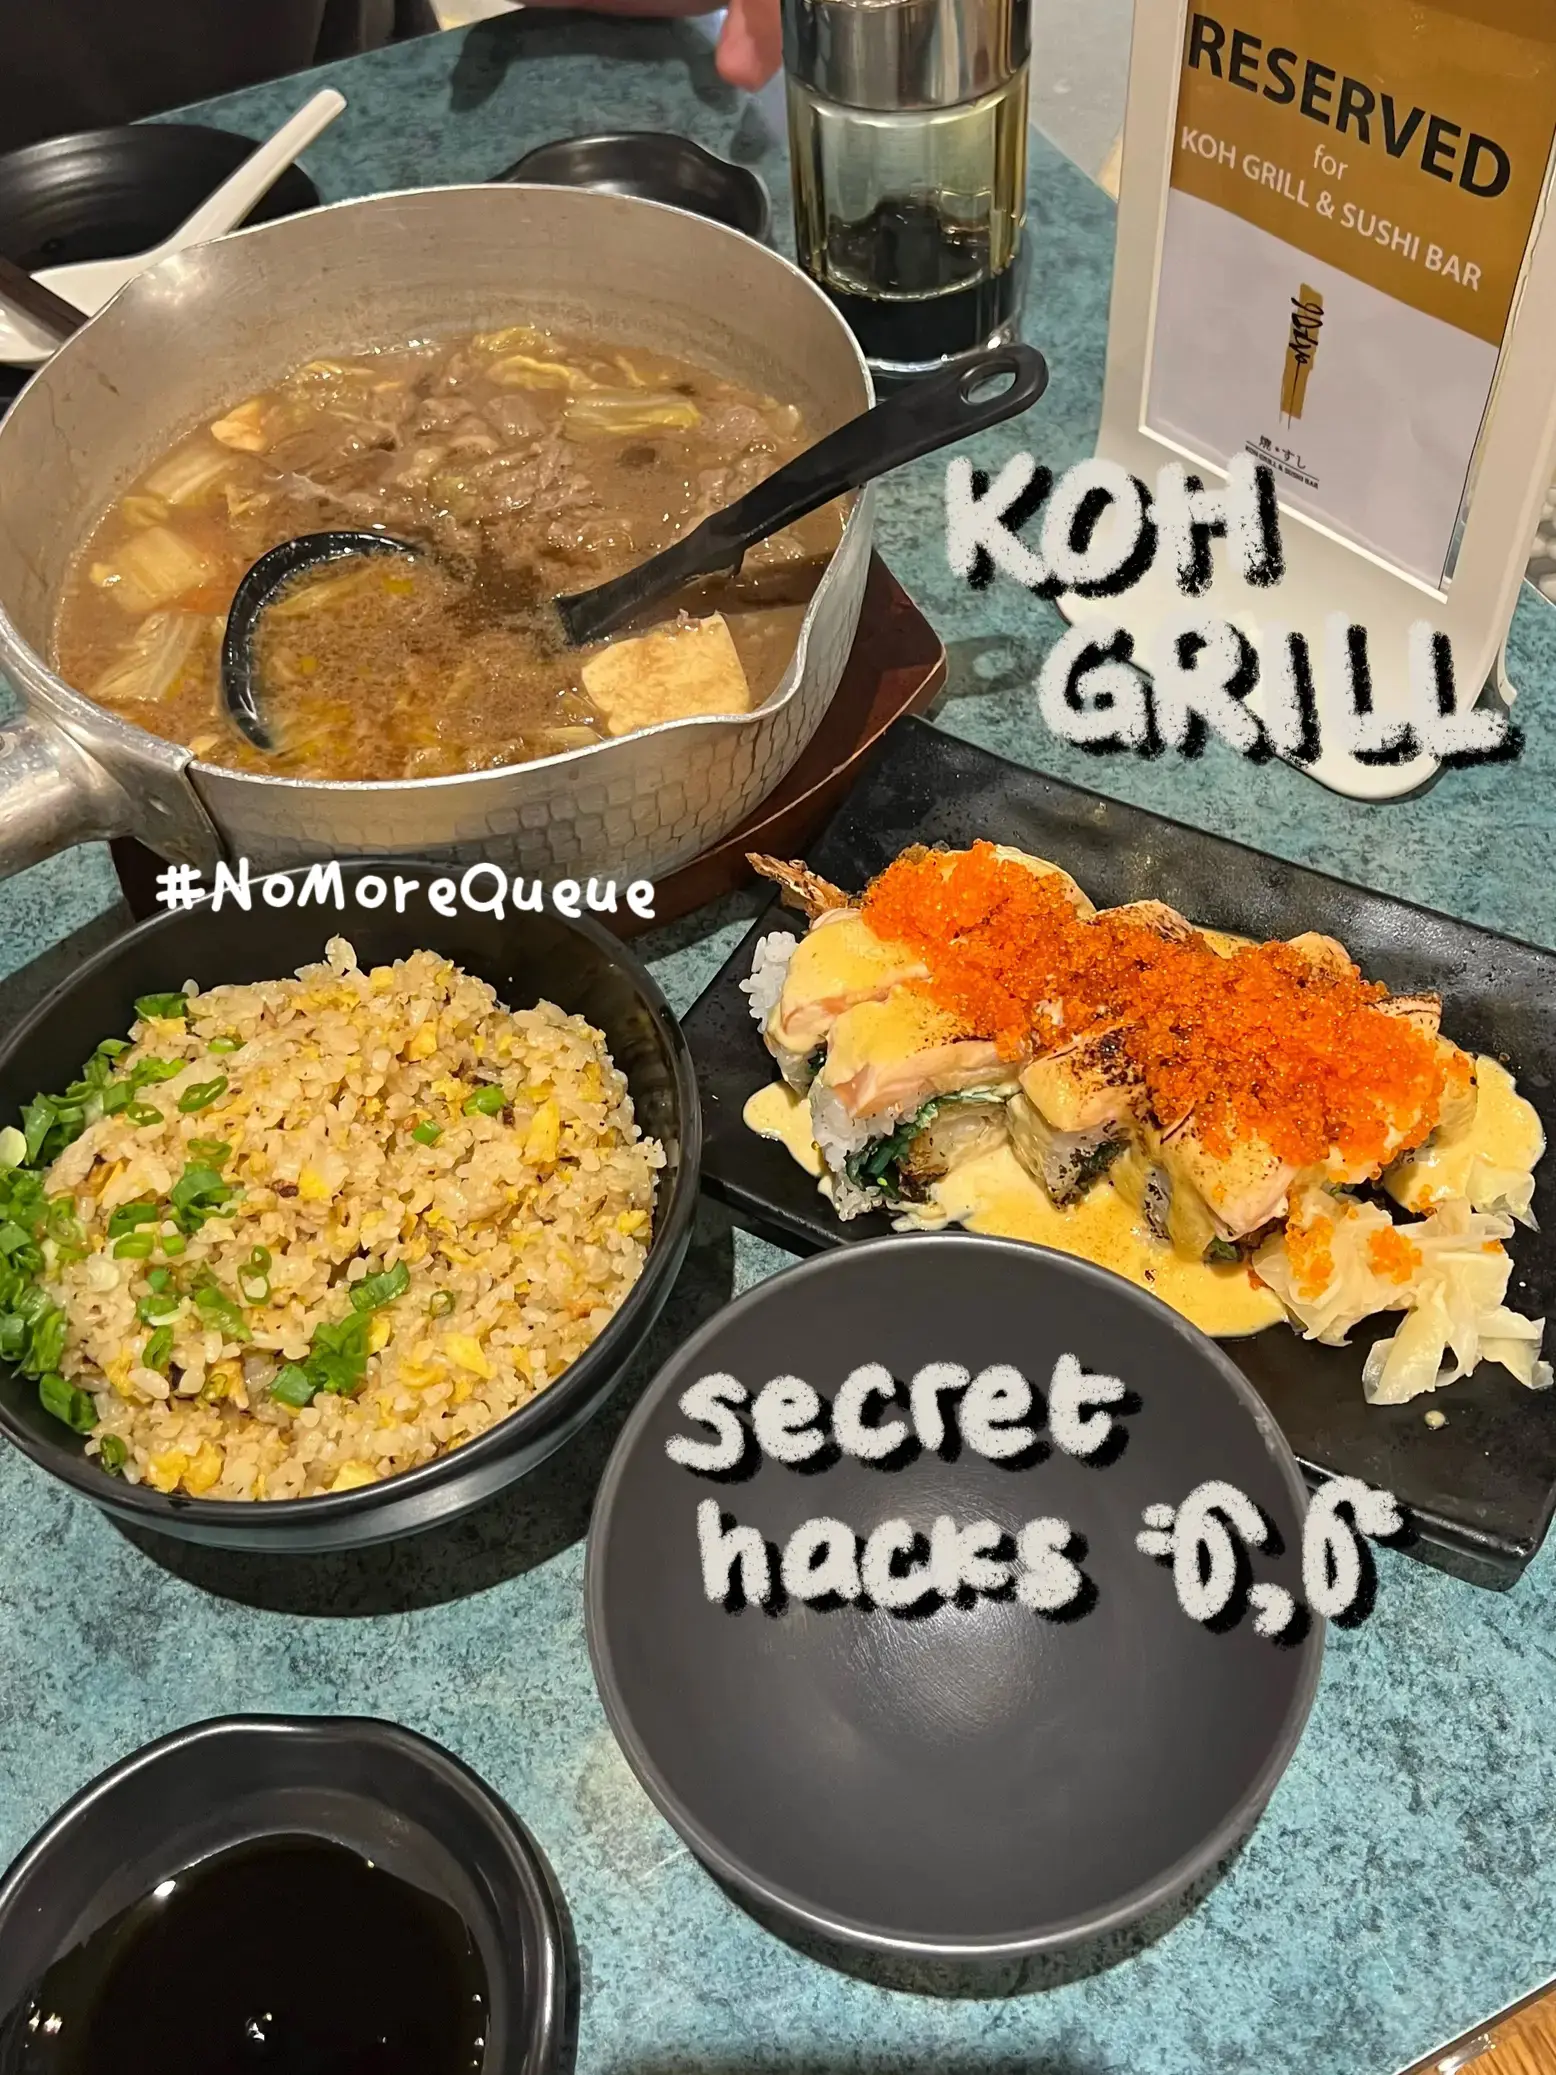 No.1 HACKS for Koh Grill Sushi Bar 😘's images